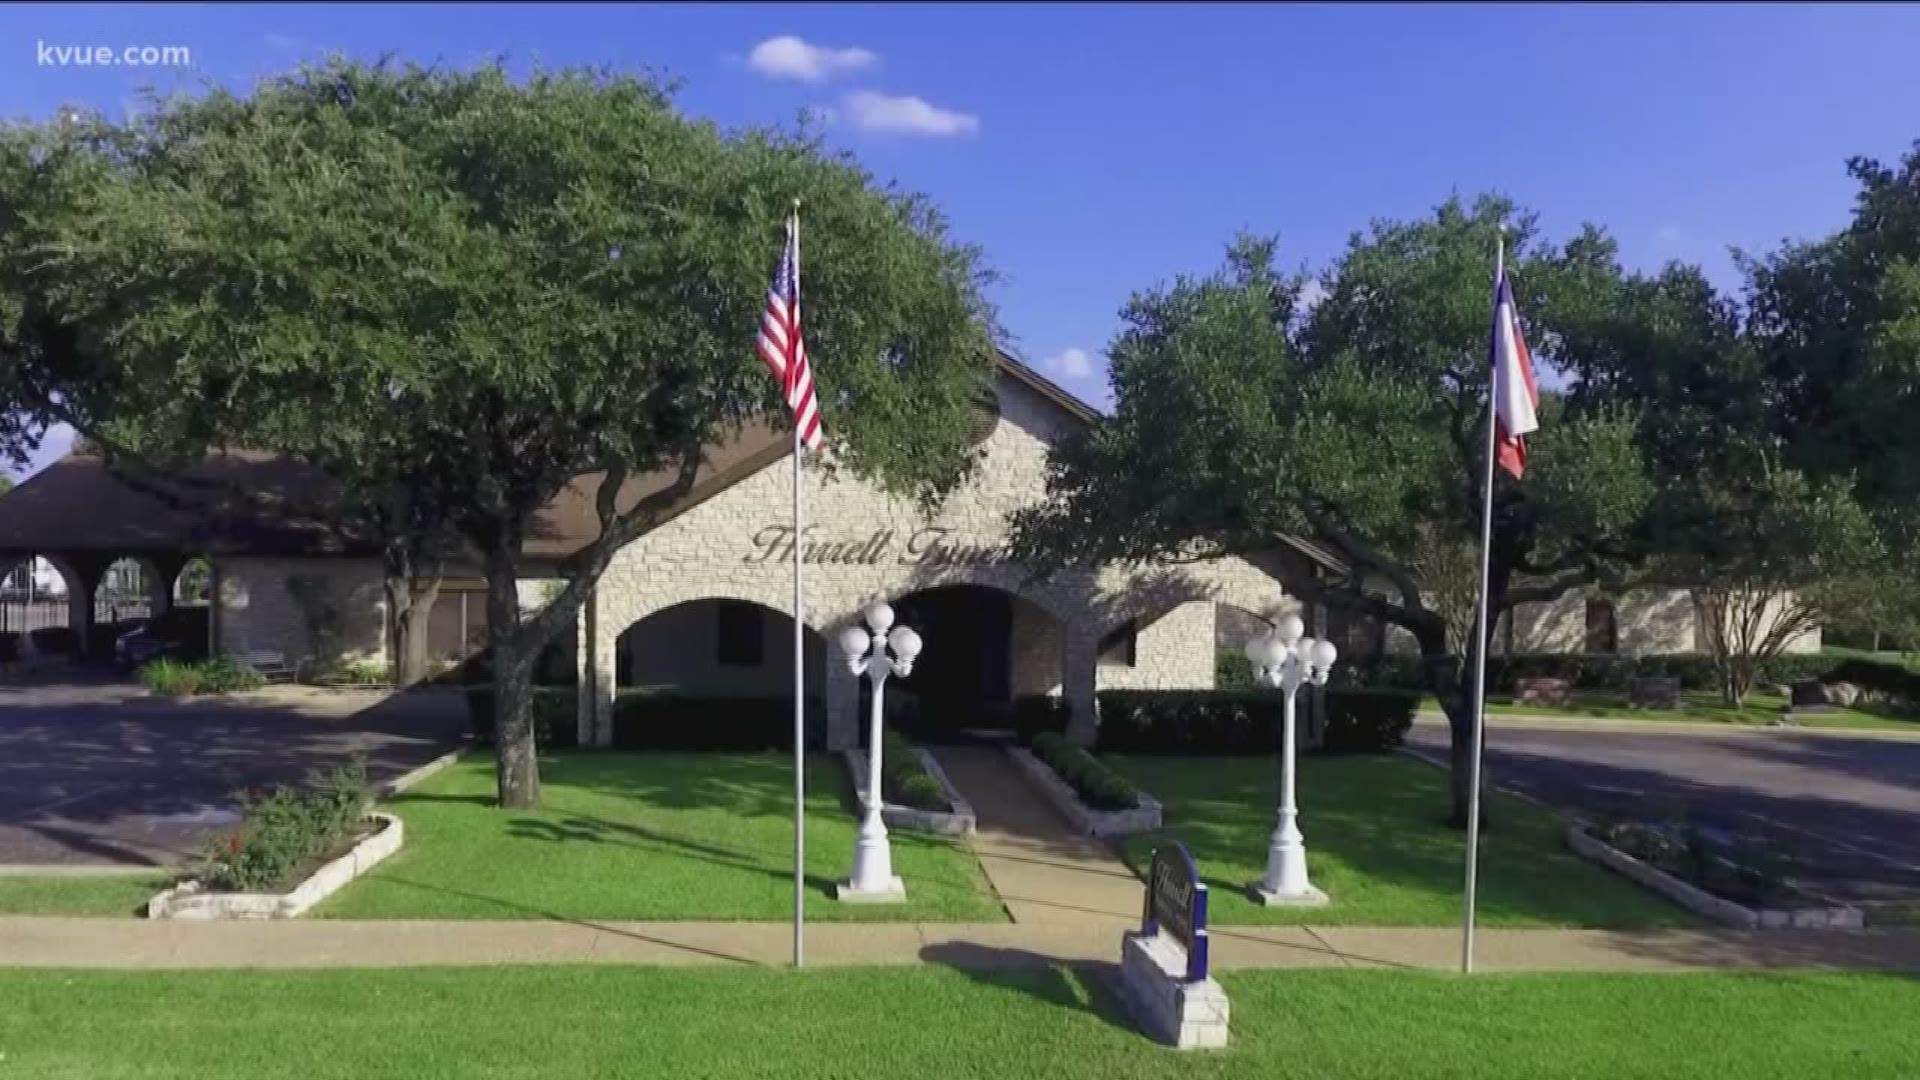 While many Texas businesses are reopening, some funeral home owners said there's not much normalcy returning to their services.